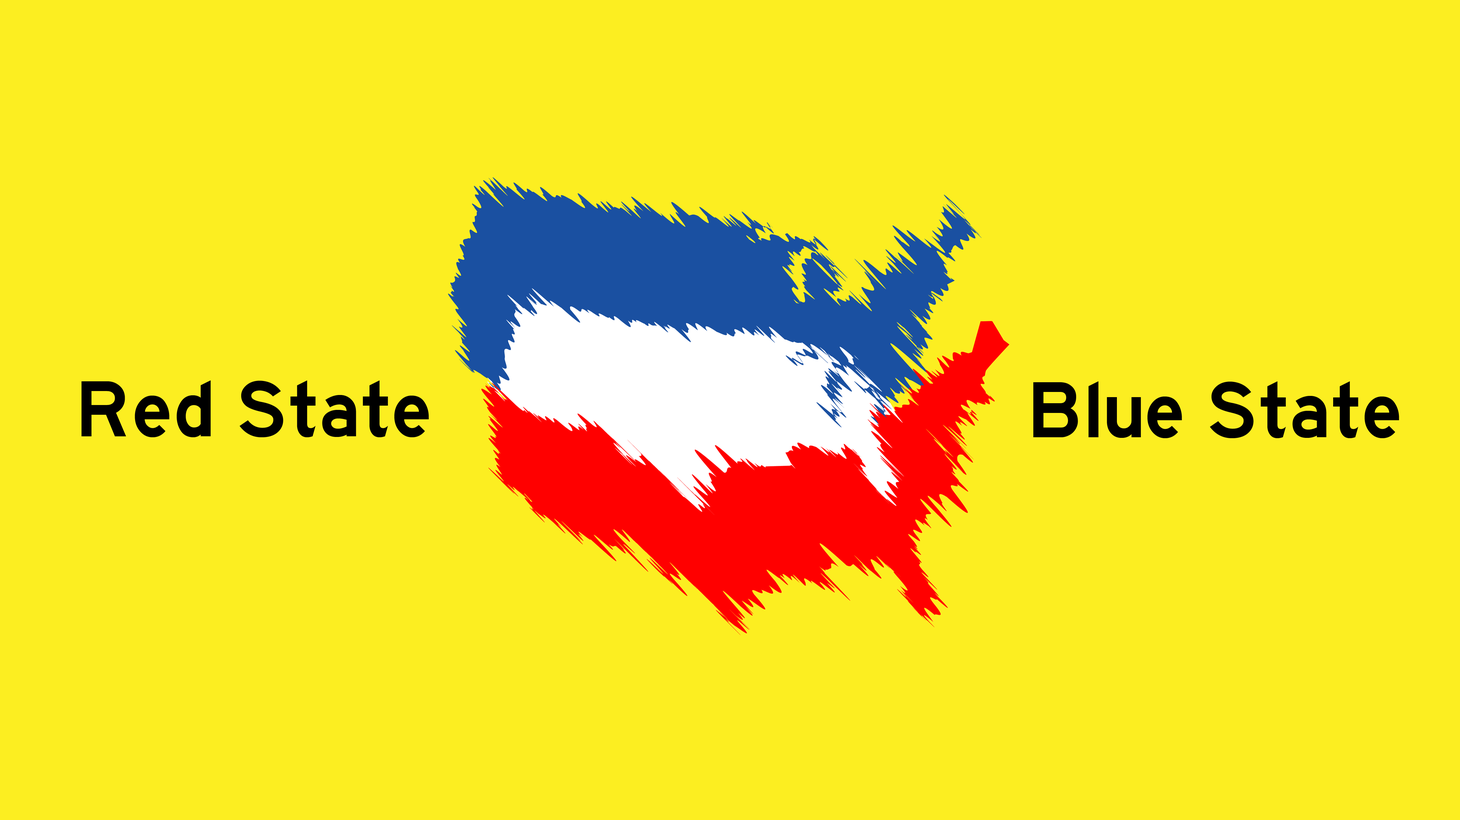 California used to be red. West Virginia used to be blue. We look at the political history of both states.